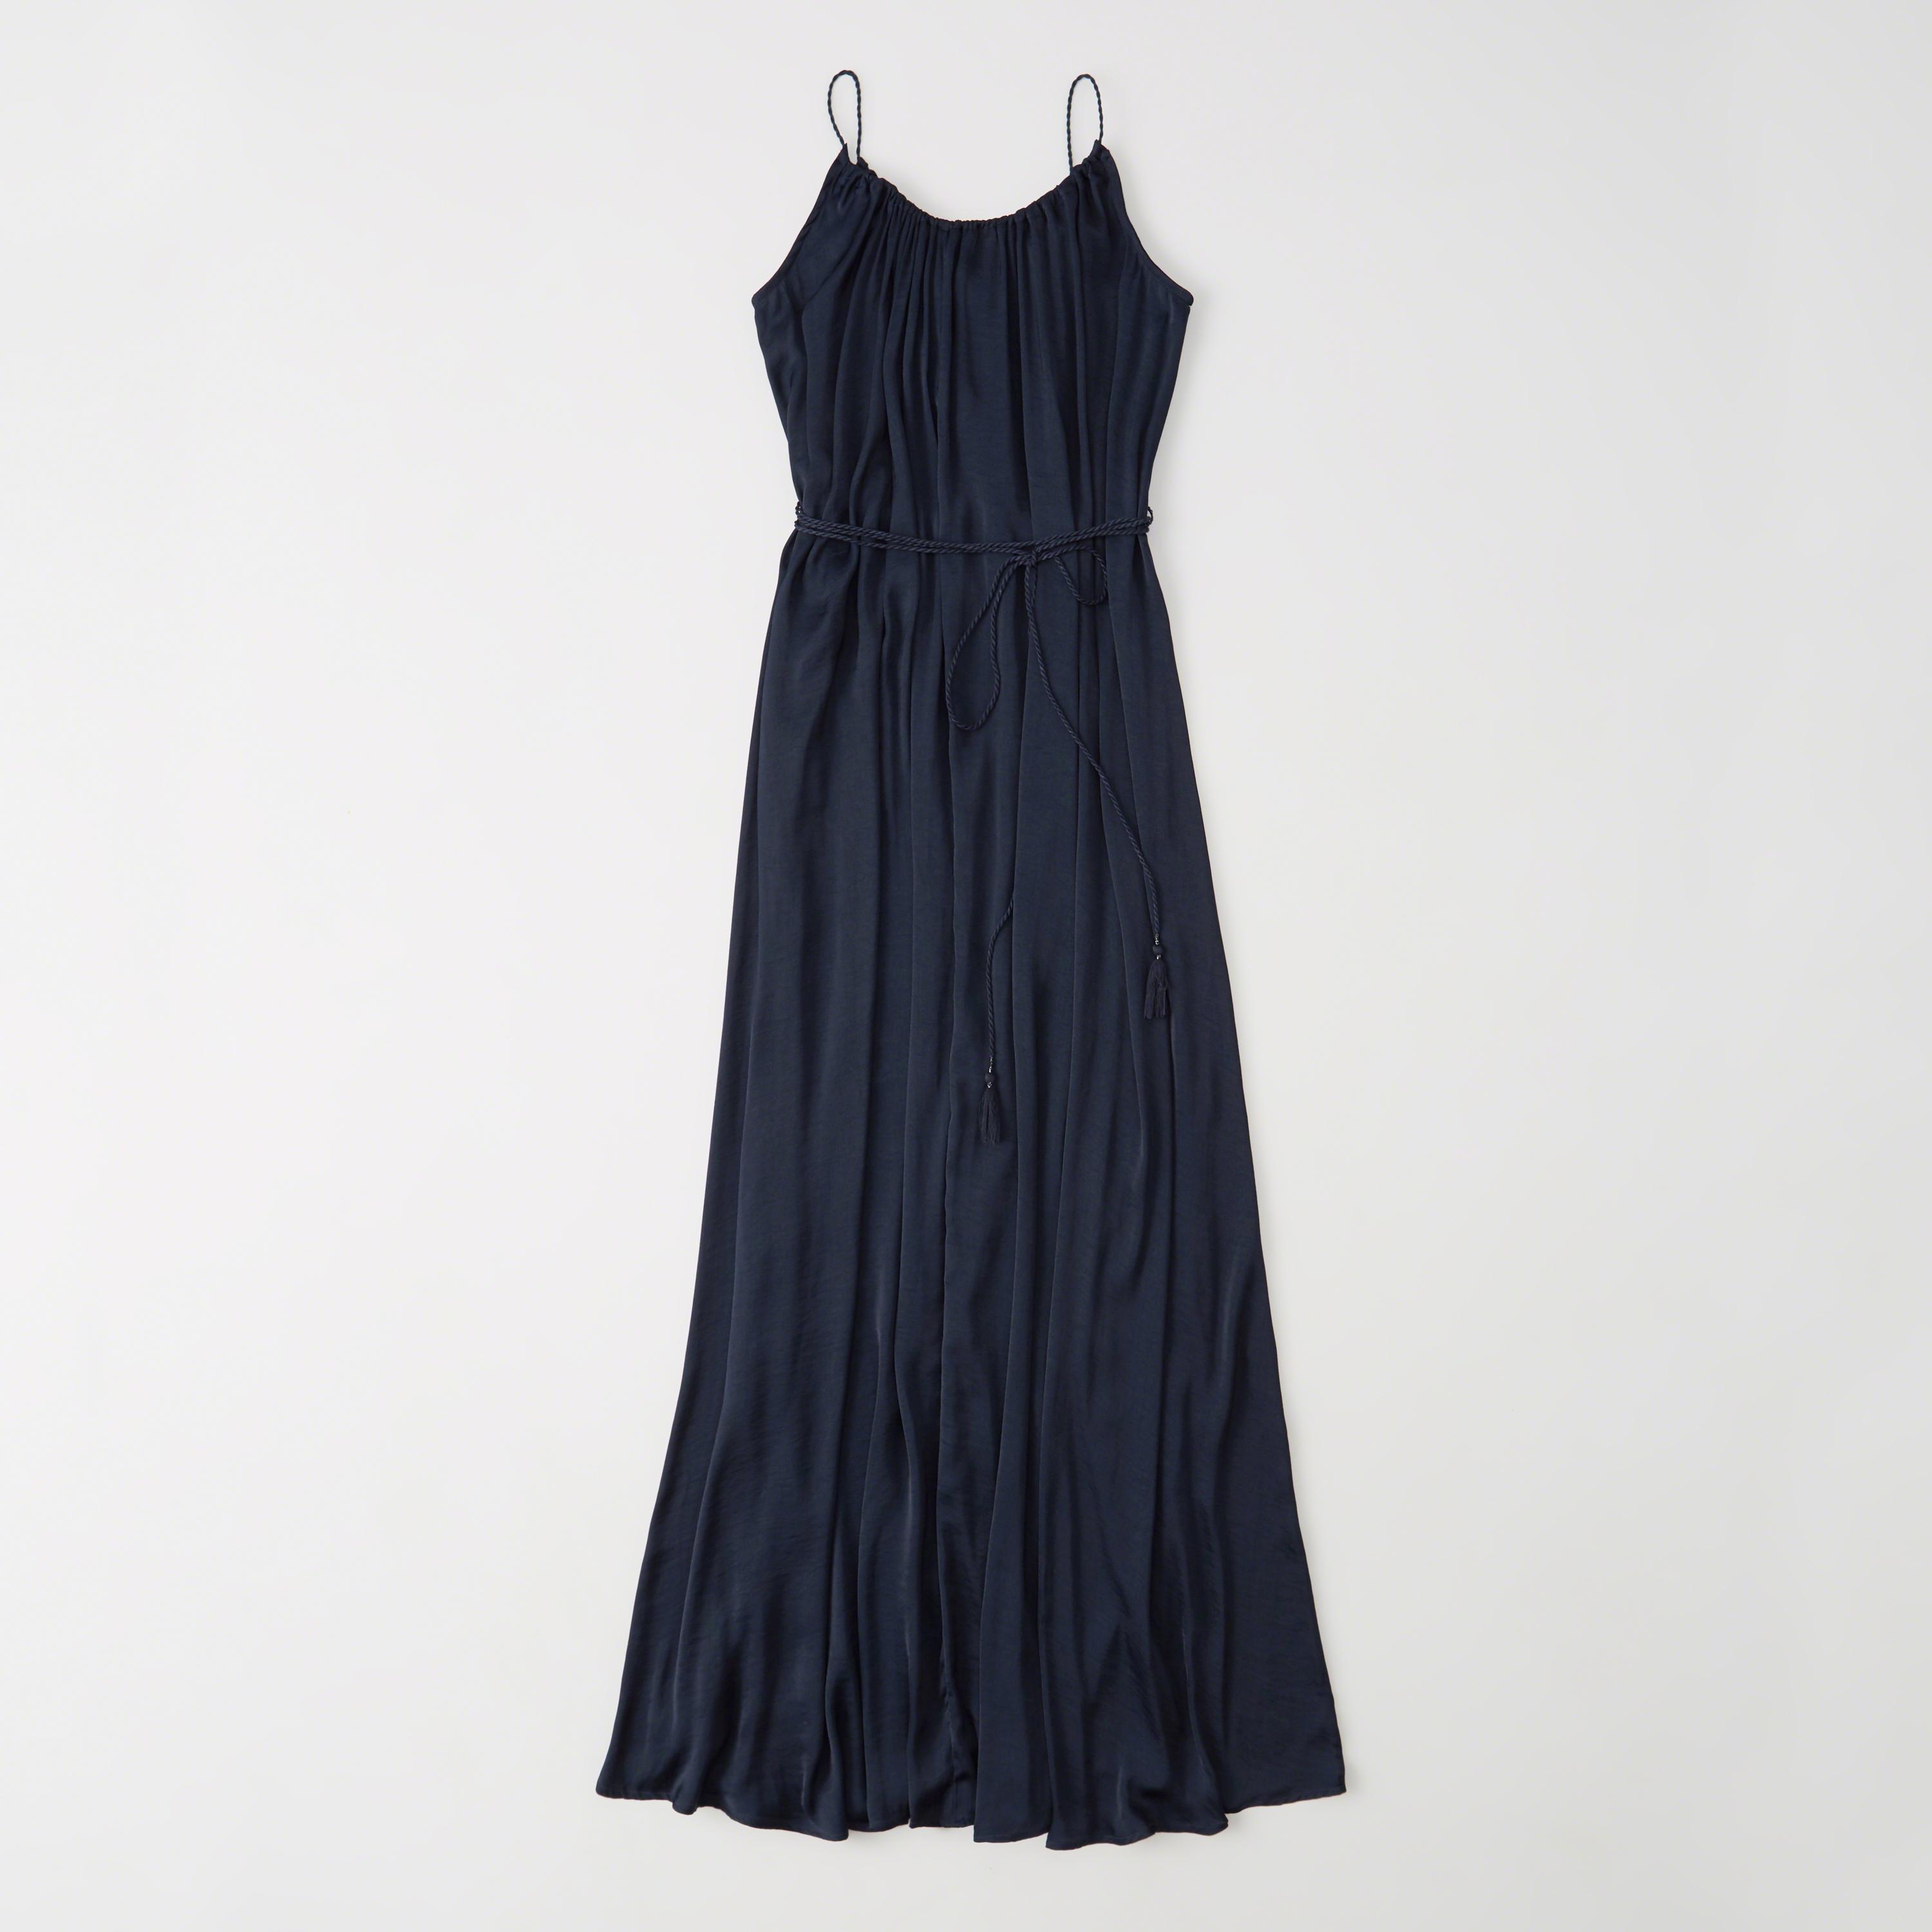 Lyst - Abercrombie & Fitch Maxi Dress in Blue